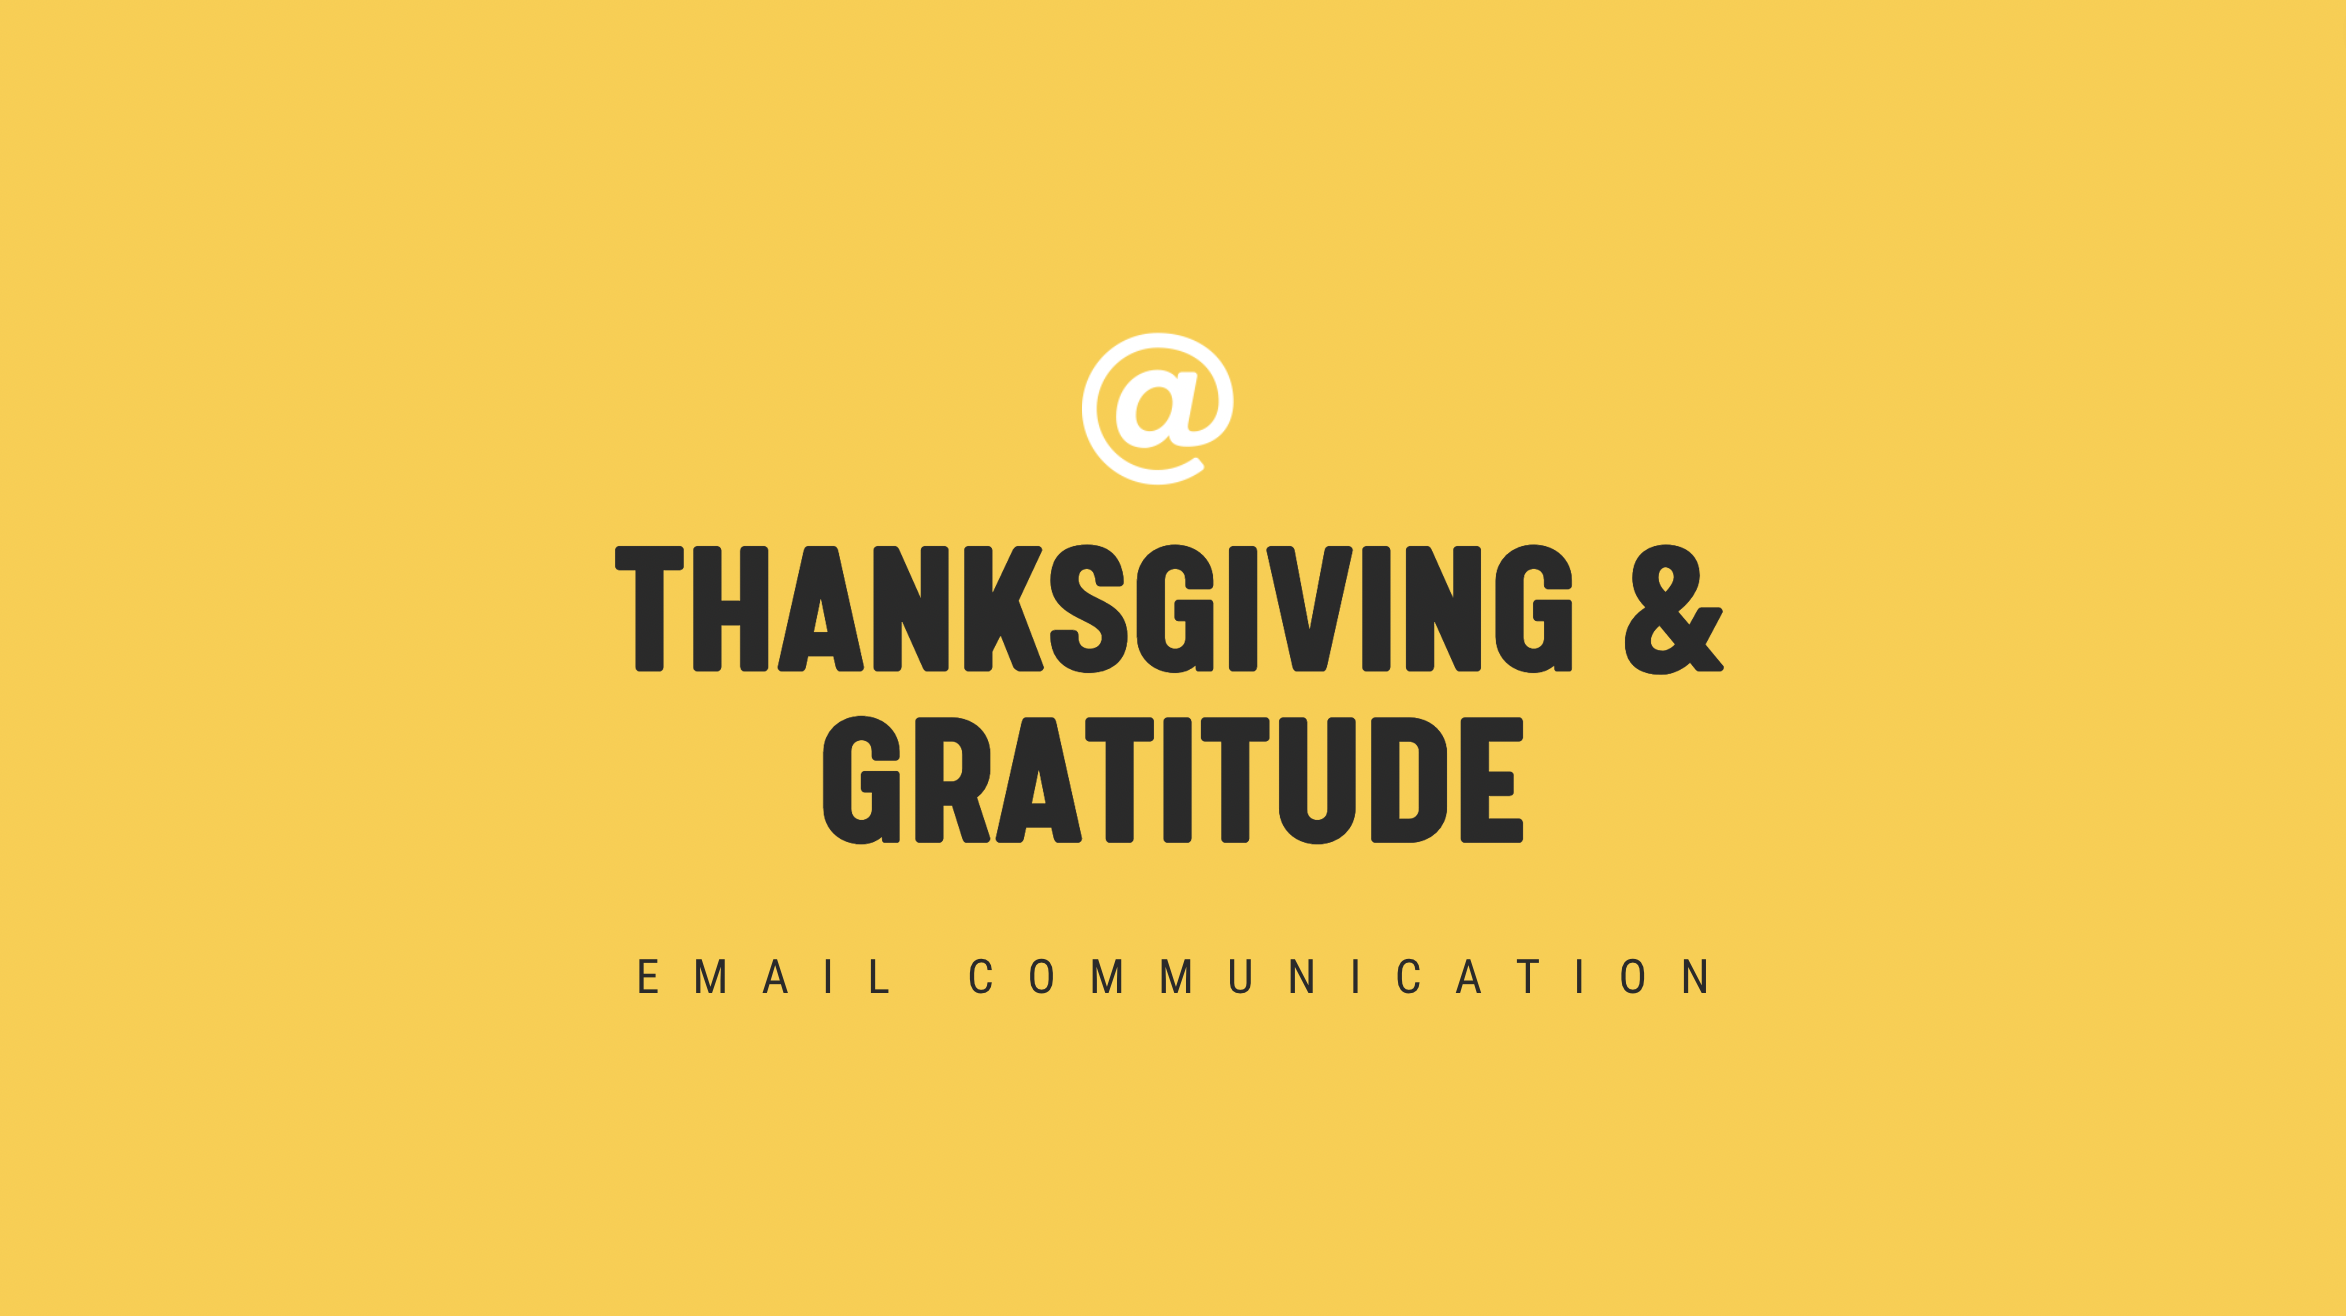 [NEW] Thanksgiving & Gratitude - Timely Email